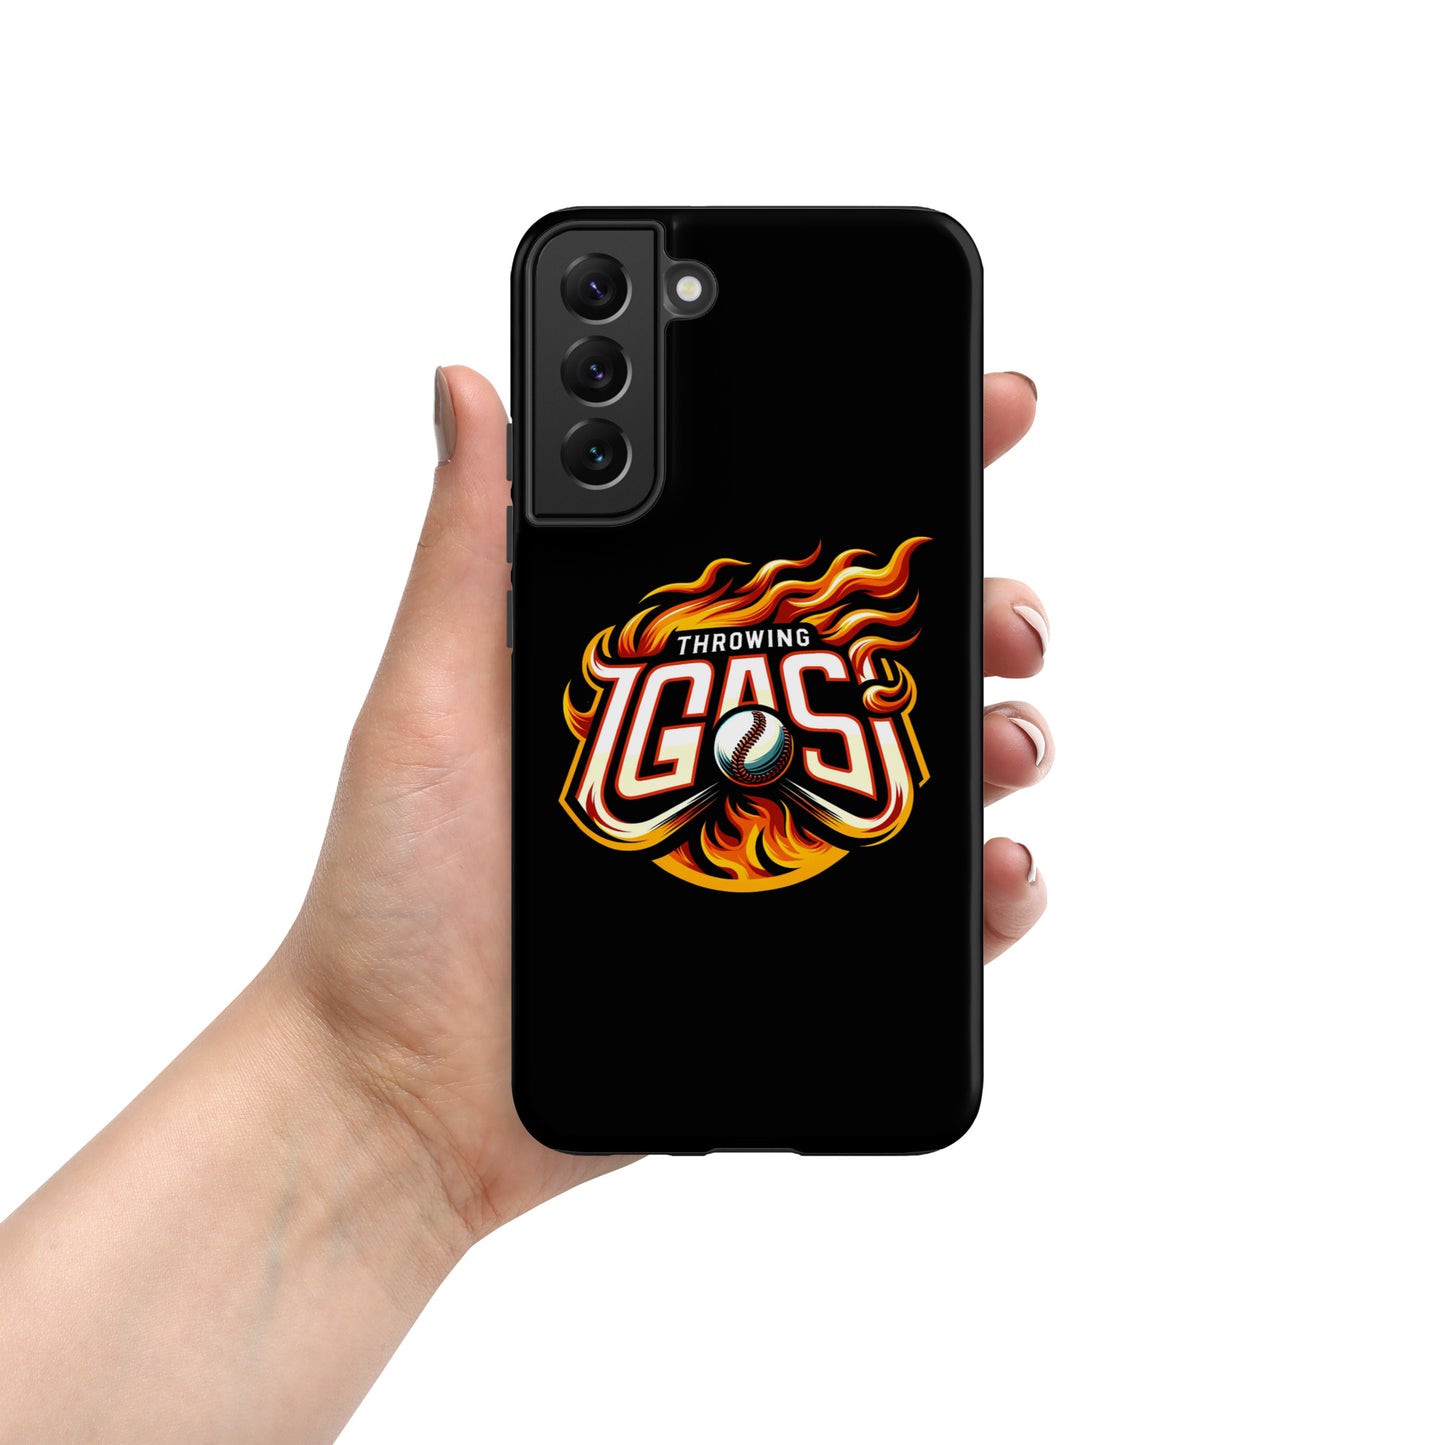 "Throwing Gas" Heavy Duty Phone Case for Samsung®